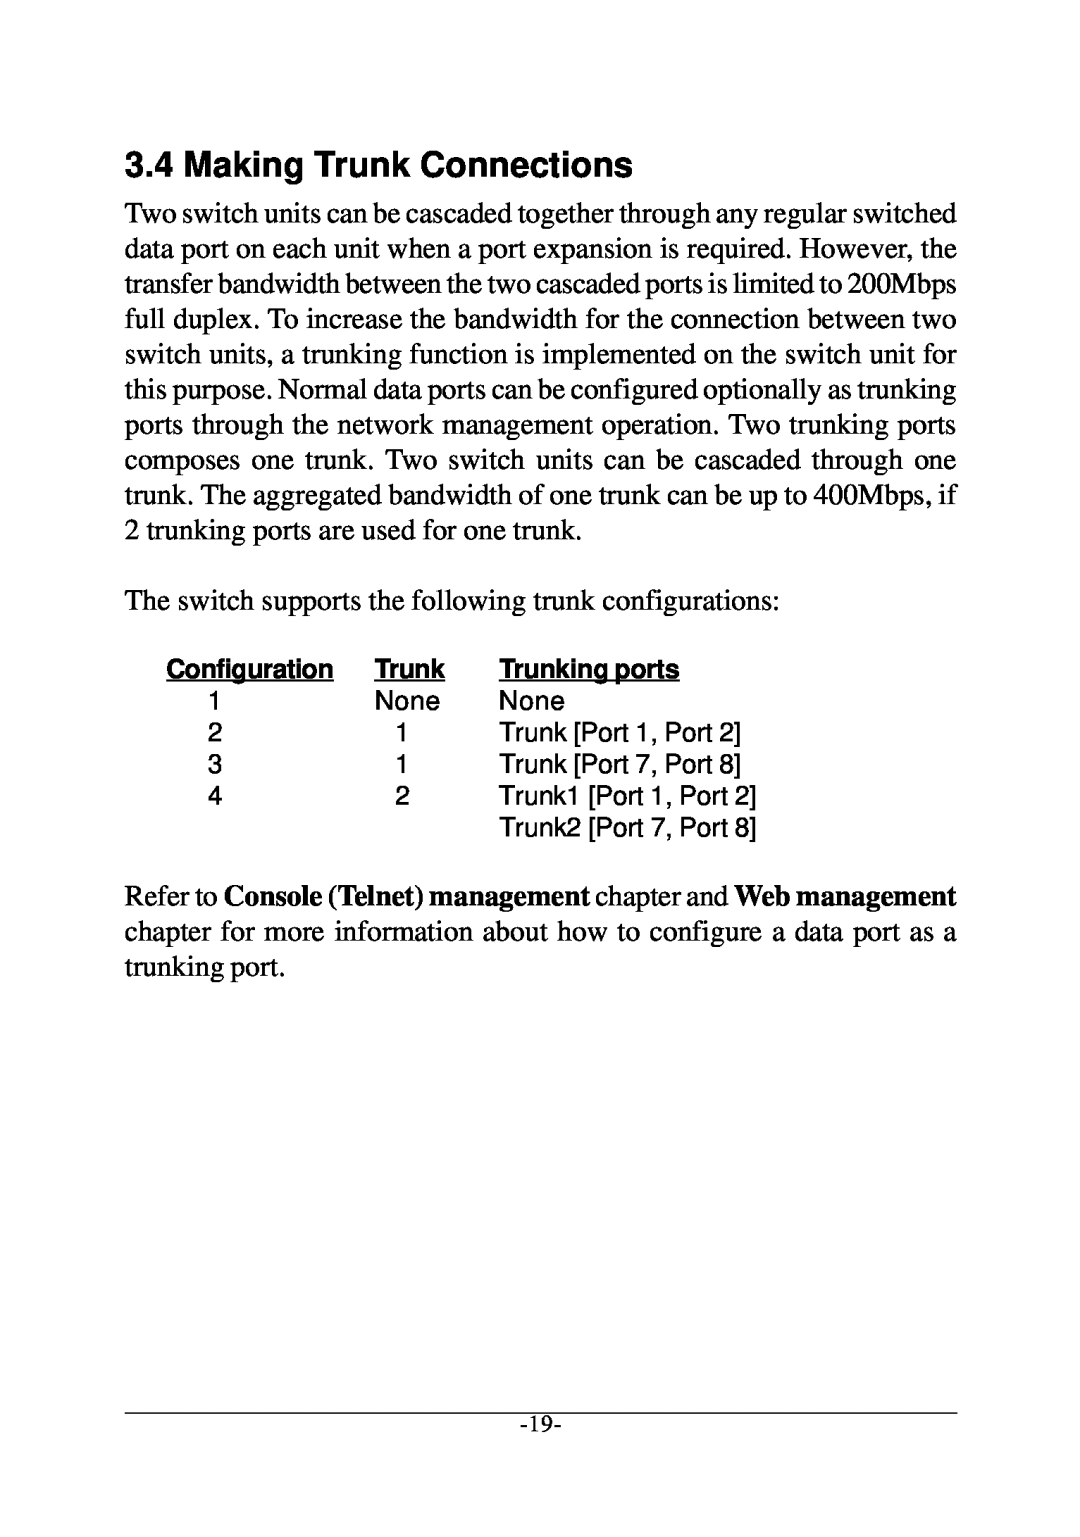 Xerox KS-801 operation manual Making Trunk Connections, Refer to Console Telnet management chapter and Web management 